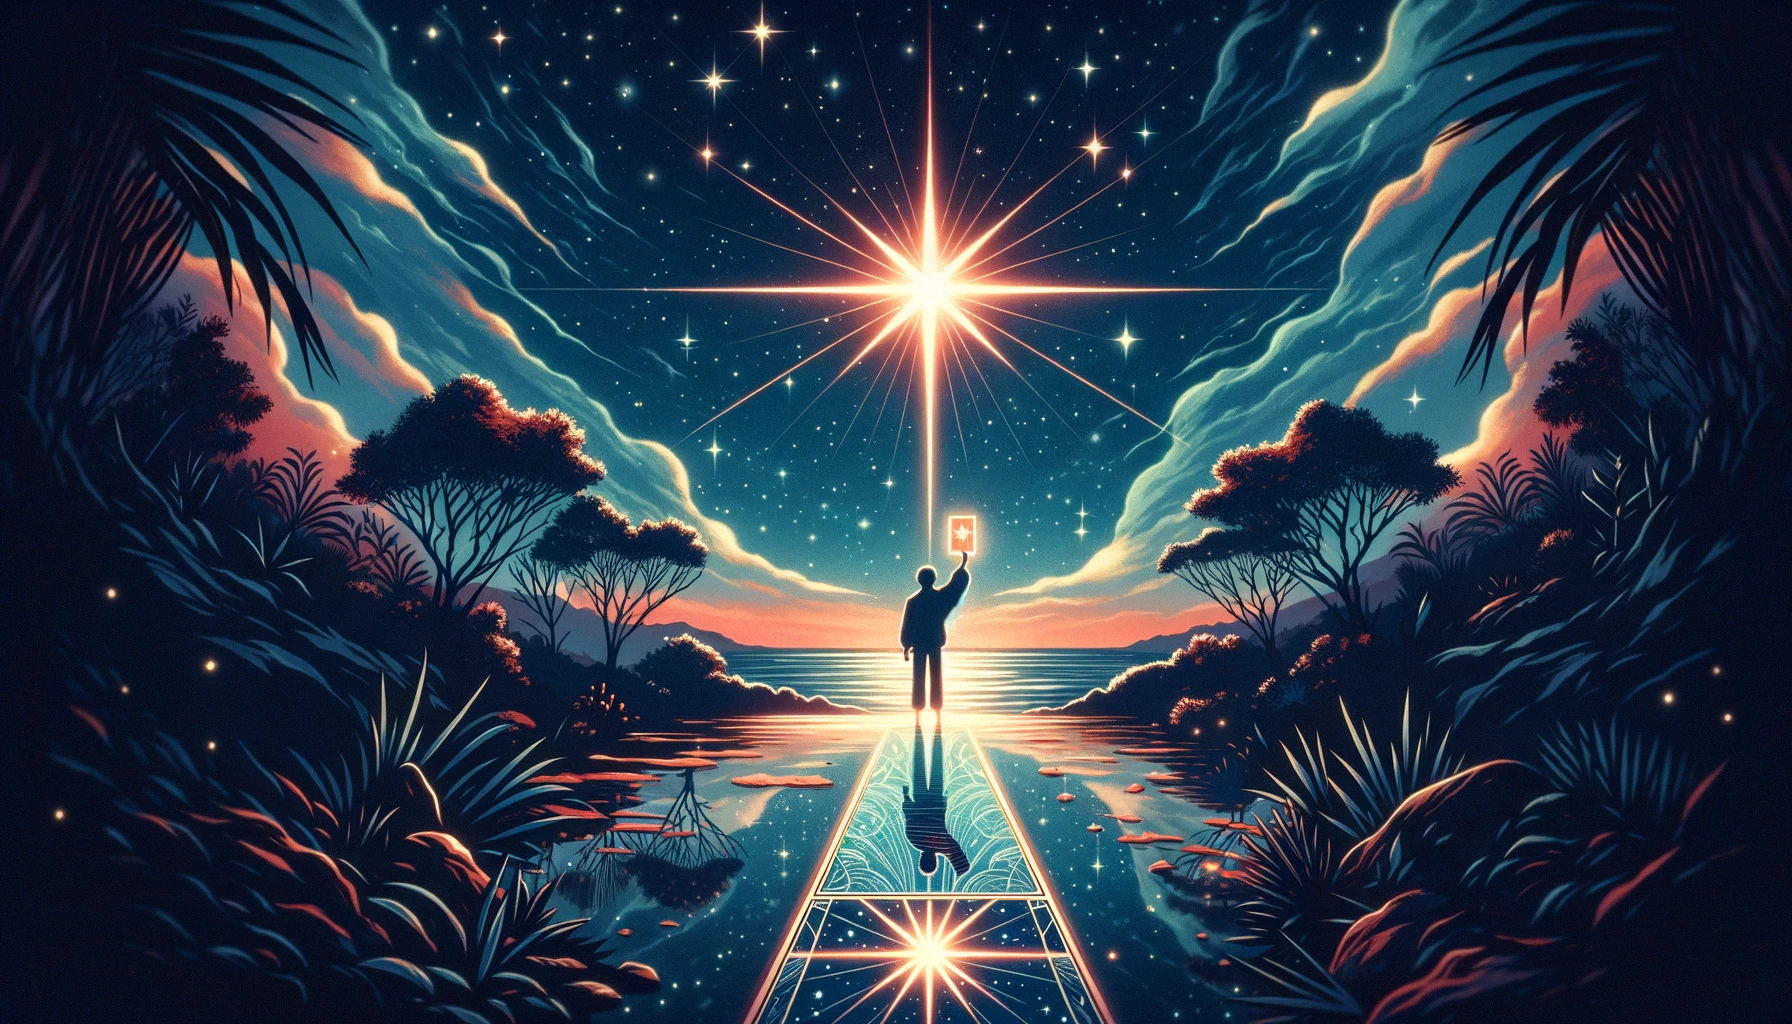 "Illustration capturing the essence of seeking hope, inspiration, and a deep spiritual connection, setting an optimistic tone for your article discussing 'The Star' as representing desires for guidance, healing, and a brighter future."